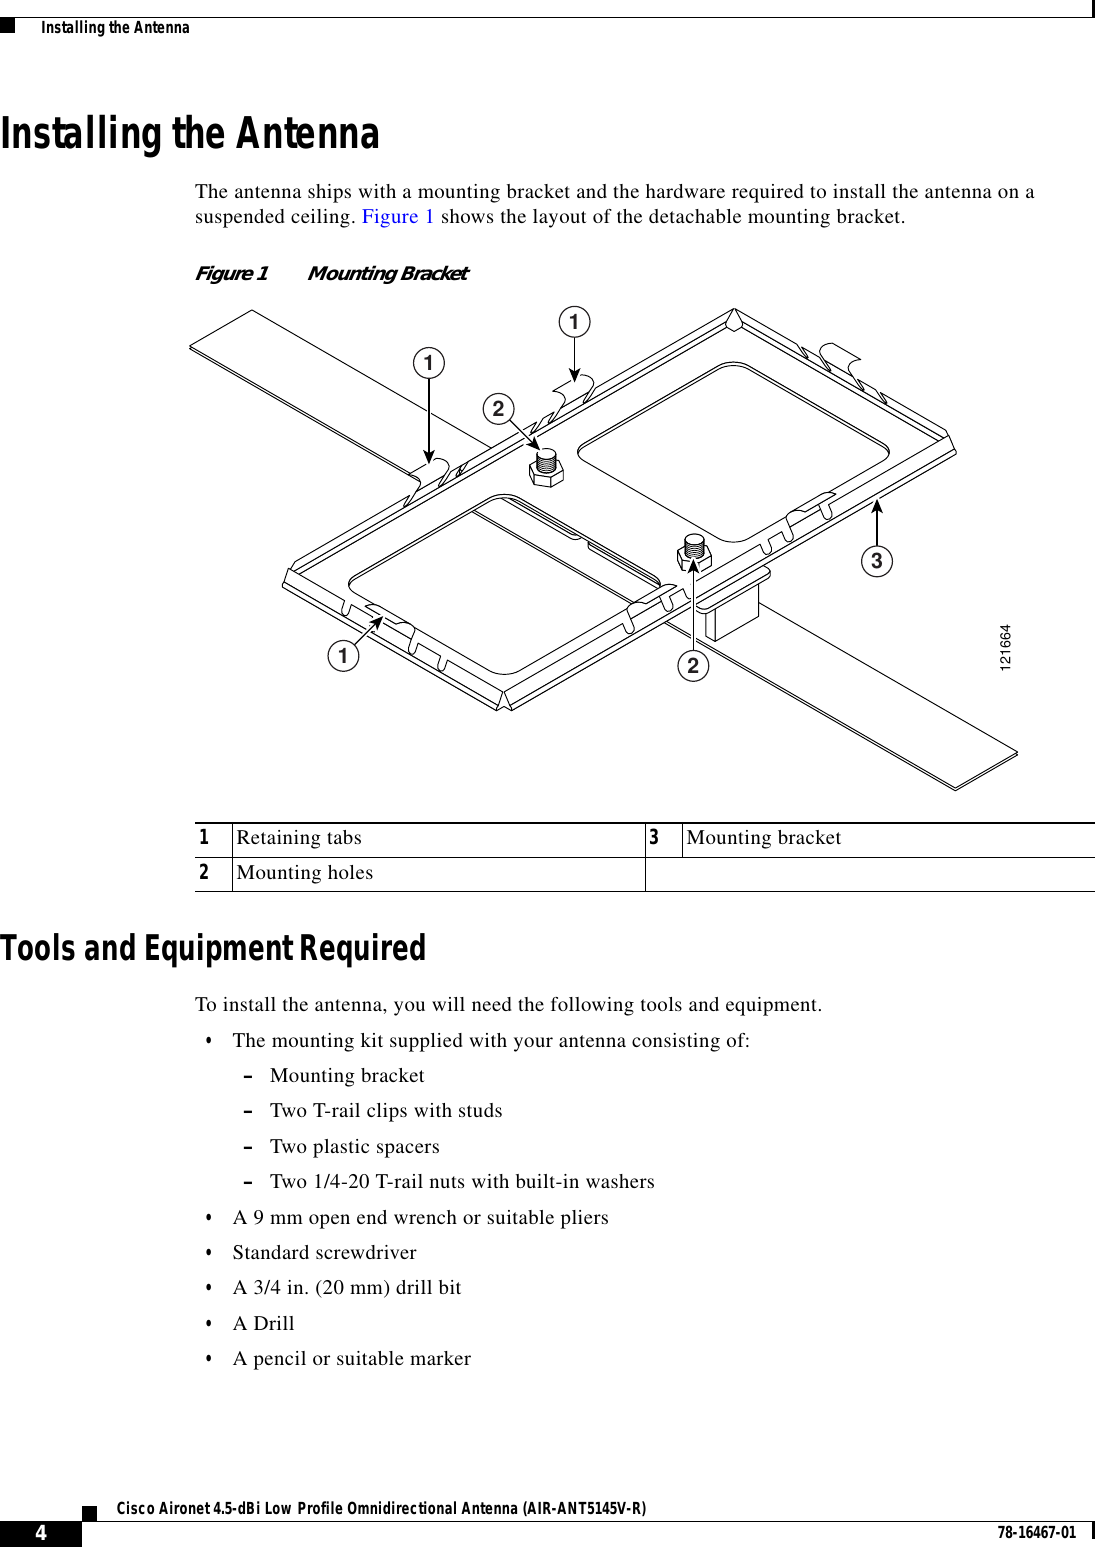 4Cisco Aironet 4.5-dBi Low Profile Omnidirectional Antenna (AIR-ANT5145V-R) 78-16467-01  Installing the AntennaInstalling the AntennaThe antenna ships with a mounting bracket and the hardware required to install the antenna on asuspended ceiling. Figure 1 shows the layout of the detachable mounting bracket.Figure 1 Mounting BracketTools and Equipment RequiredTo install the antenna, you will need the following tools and equipment.•The mounting kit supplied with your antenna consisting of:–Mounting bracket–Two T-rail clips with studs–Two plastic spacers–Two 1/4-20 T-rail nuts with built-in washers•A 9 mm open end wrench or suitable pliers•Standard screwdriver•A 3/4 in. (20 mm) drill bit•A Drill•A pencil or suitable marker1Retaining tabs 3Mounting bracket2Mounting holes121664113212